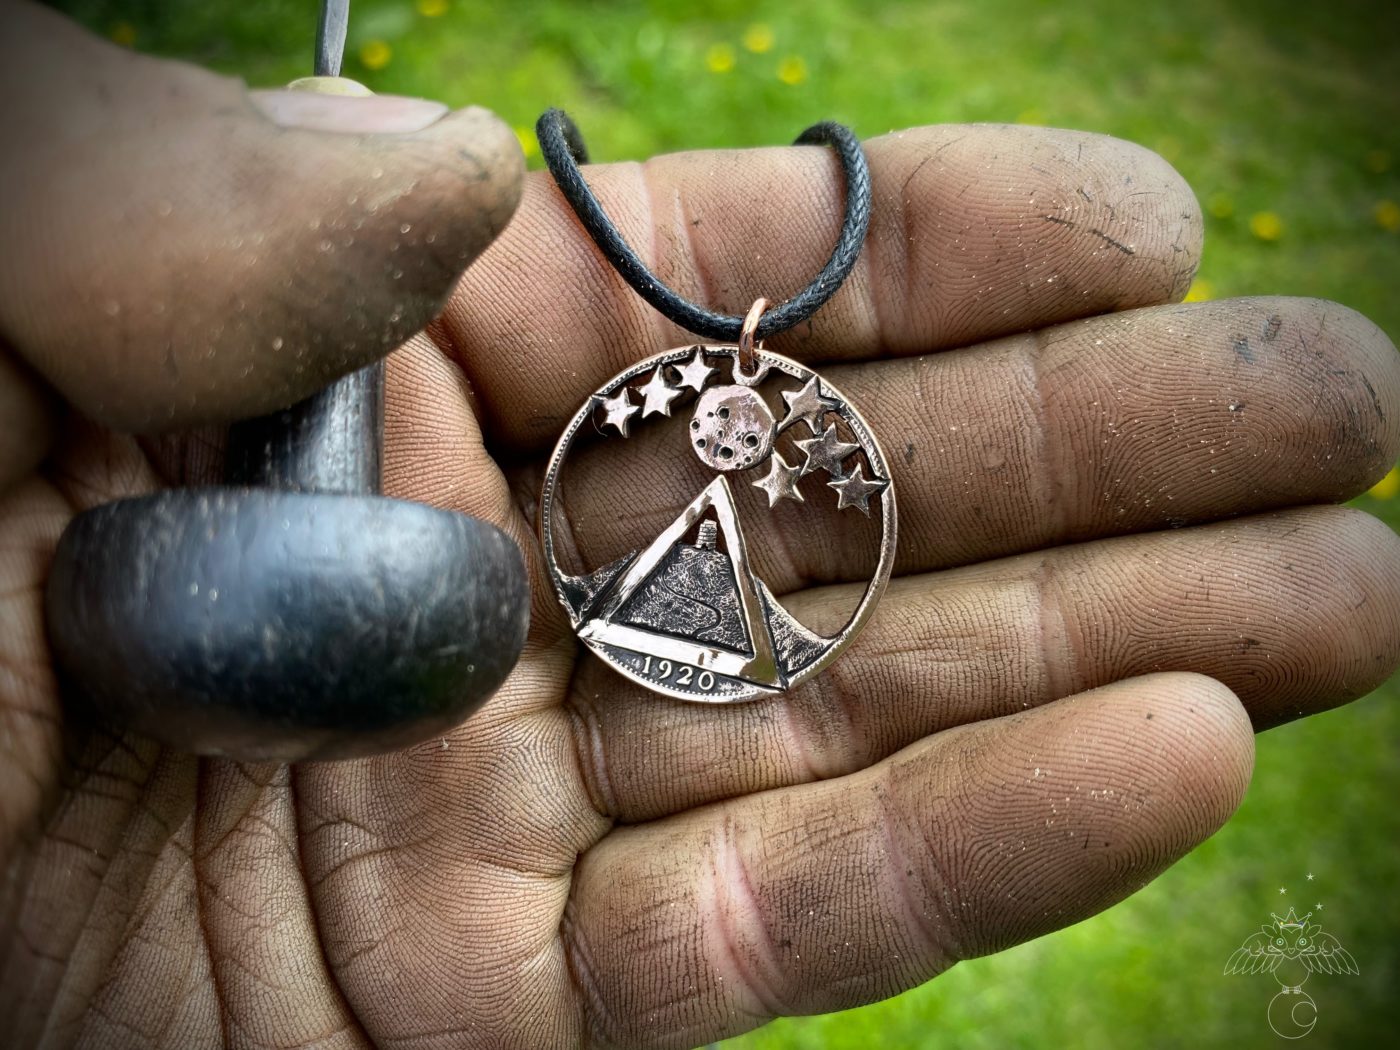 The Glastonbury Tor as seen from the Festival pyramid stage coin necklace - Recycled old English penny